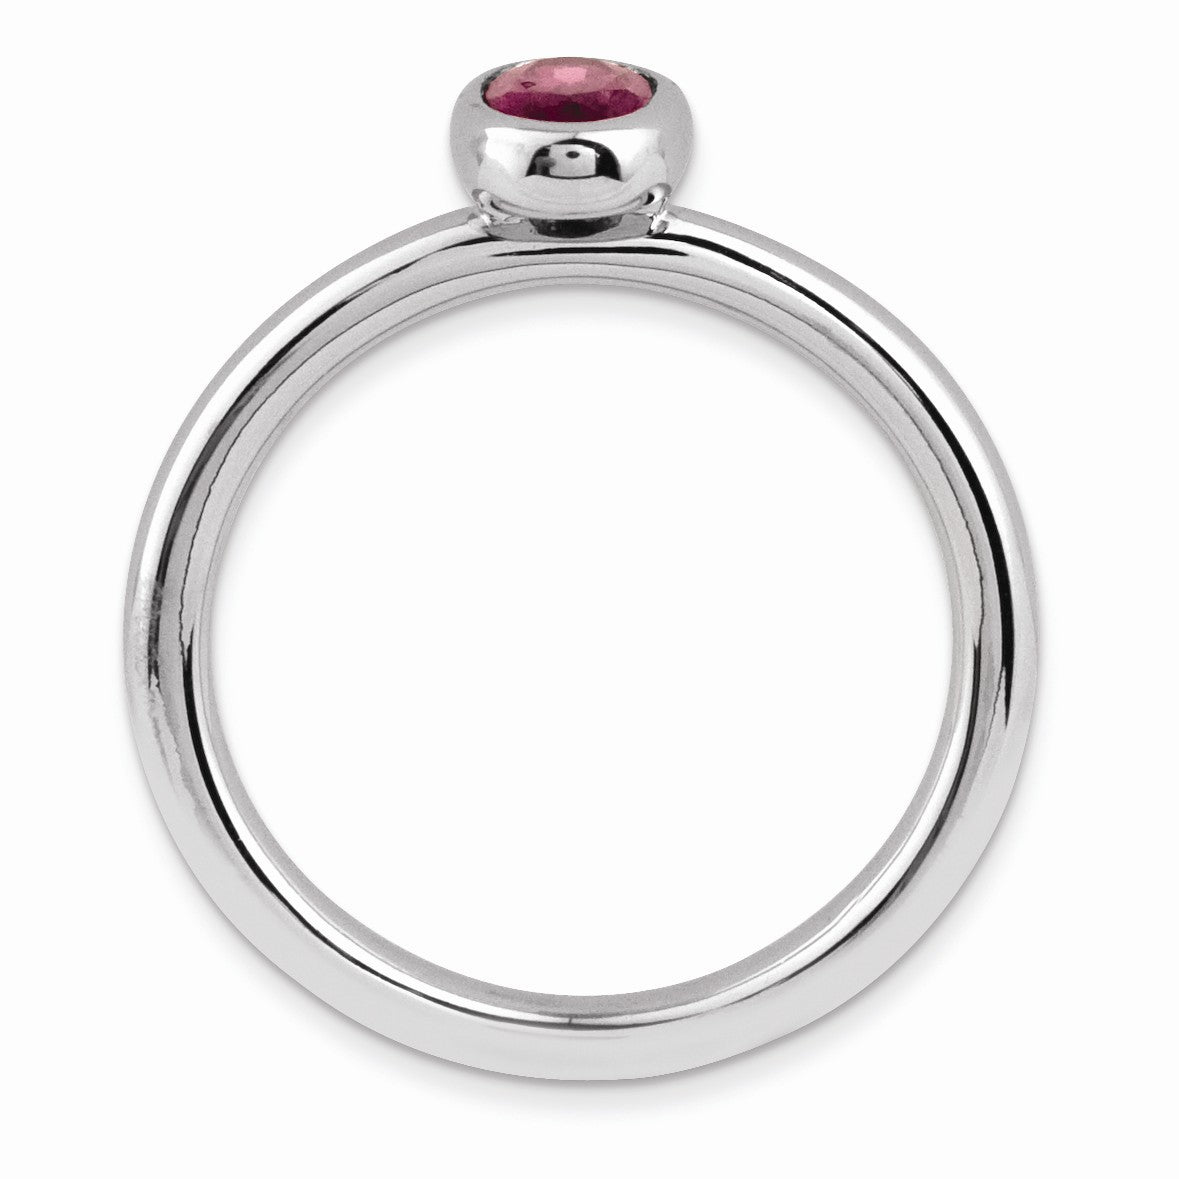 Alternate view of the Silver Stackable Oval Rhodolite Garnet Solitaire Ring by The Black Bow Jewelry Co.